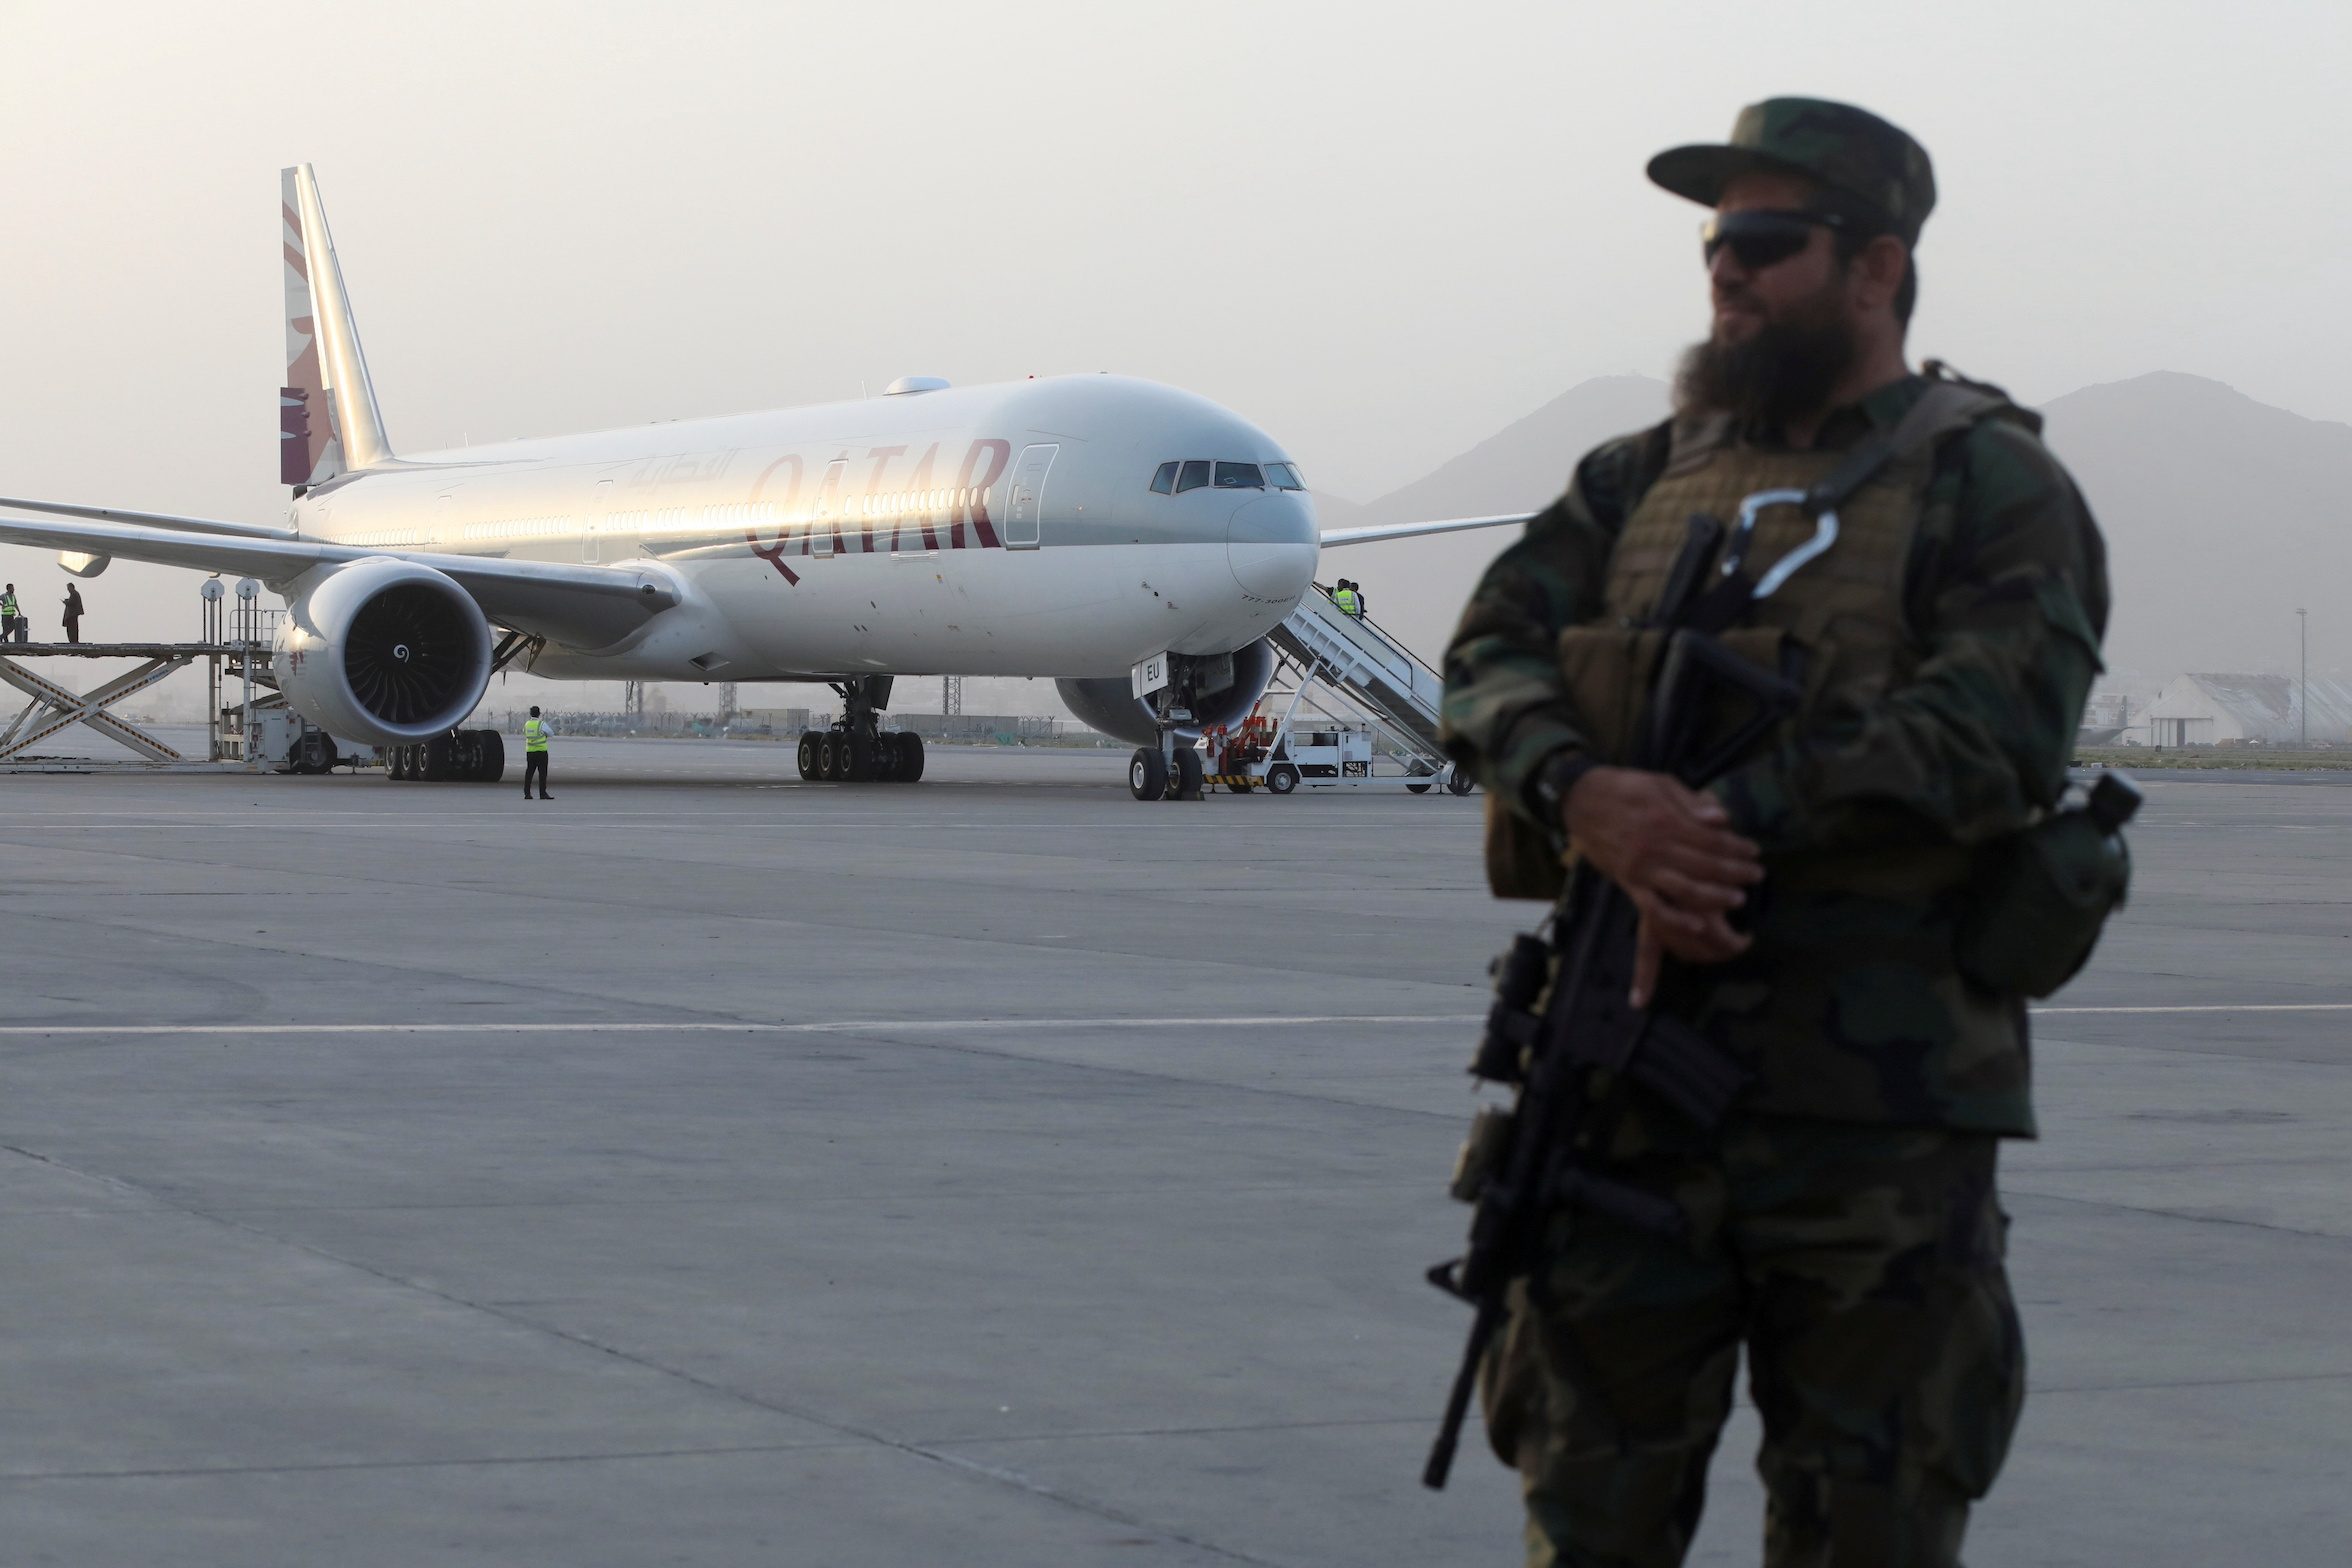 UAE holds talks with Taliban to run Kabul airport – foreign diplomats